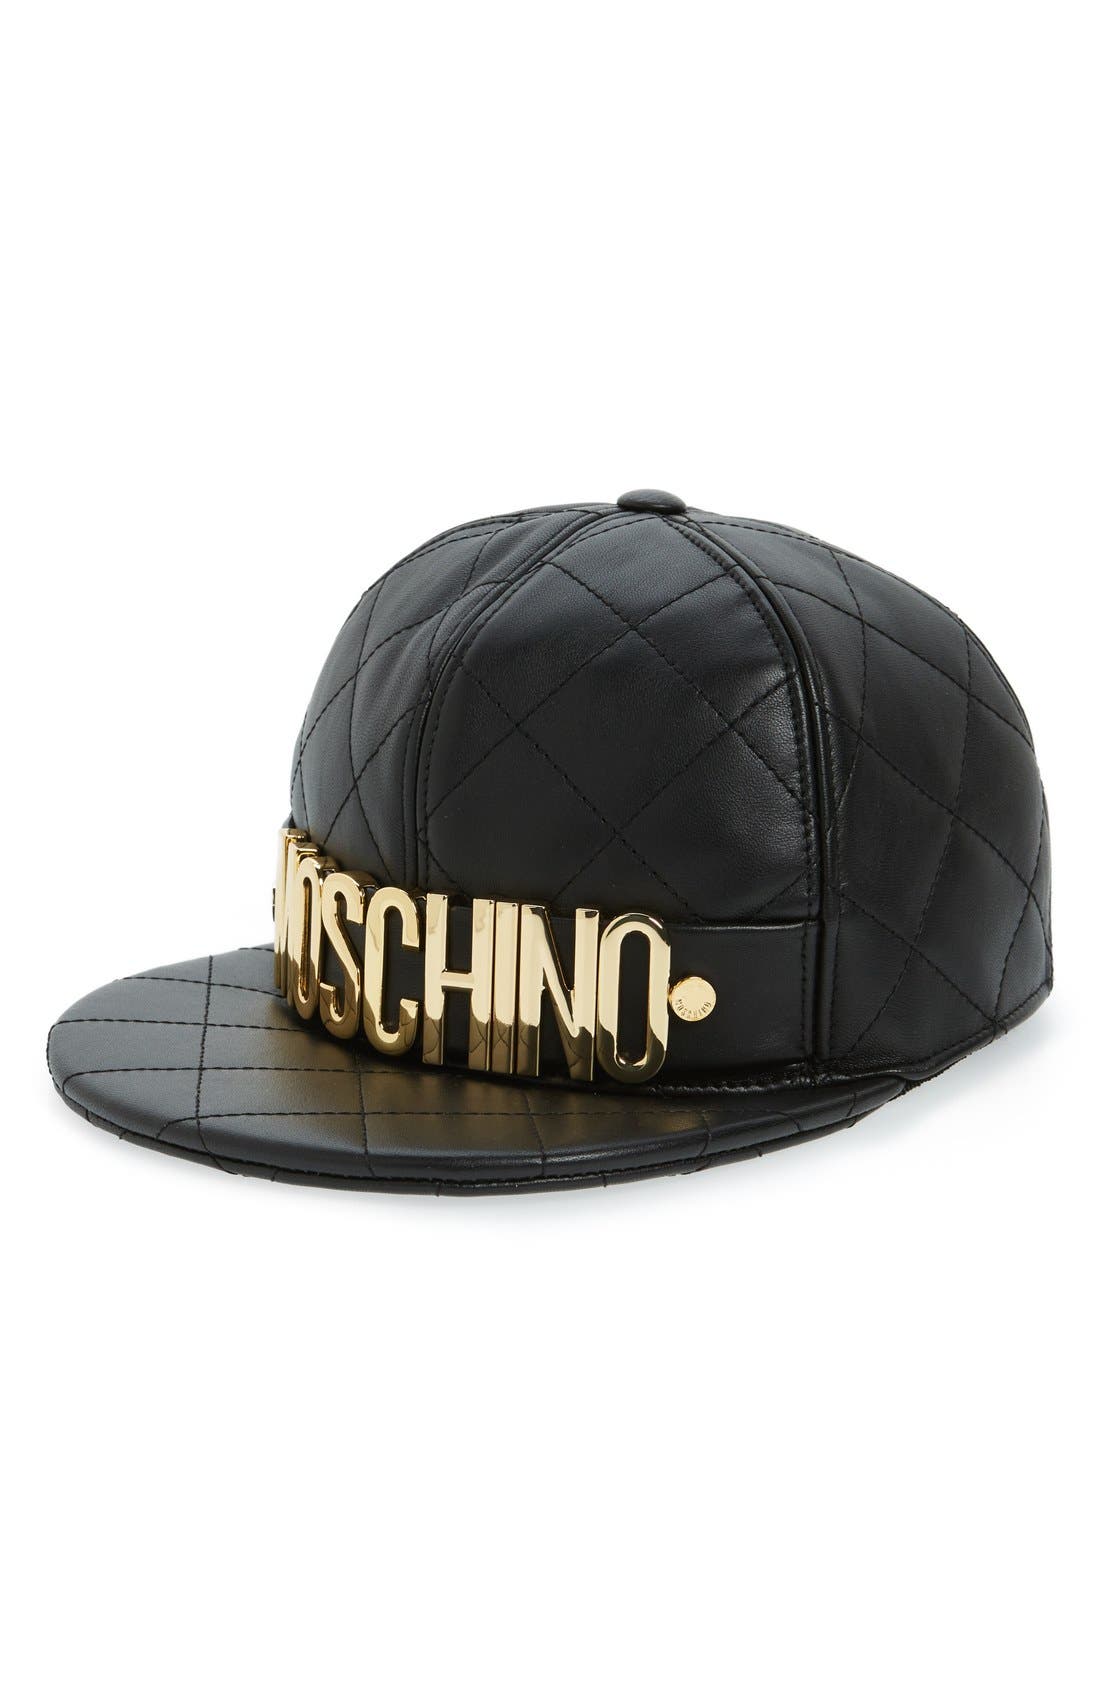 moschino leather hat